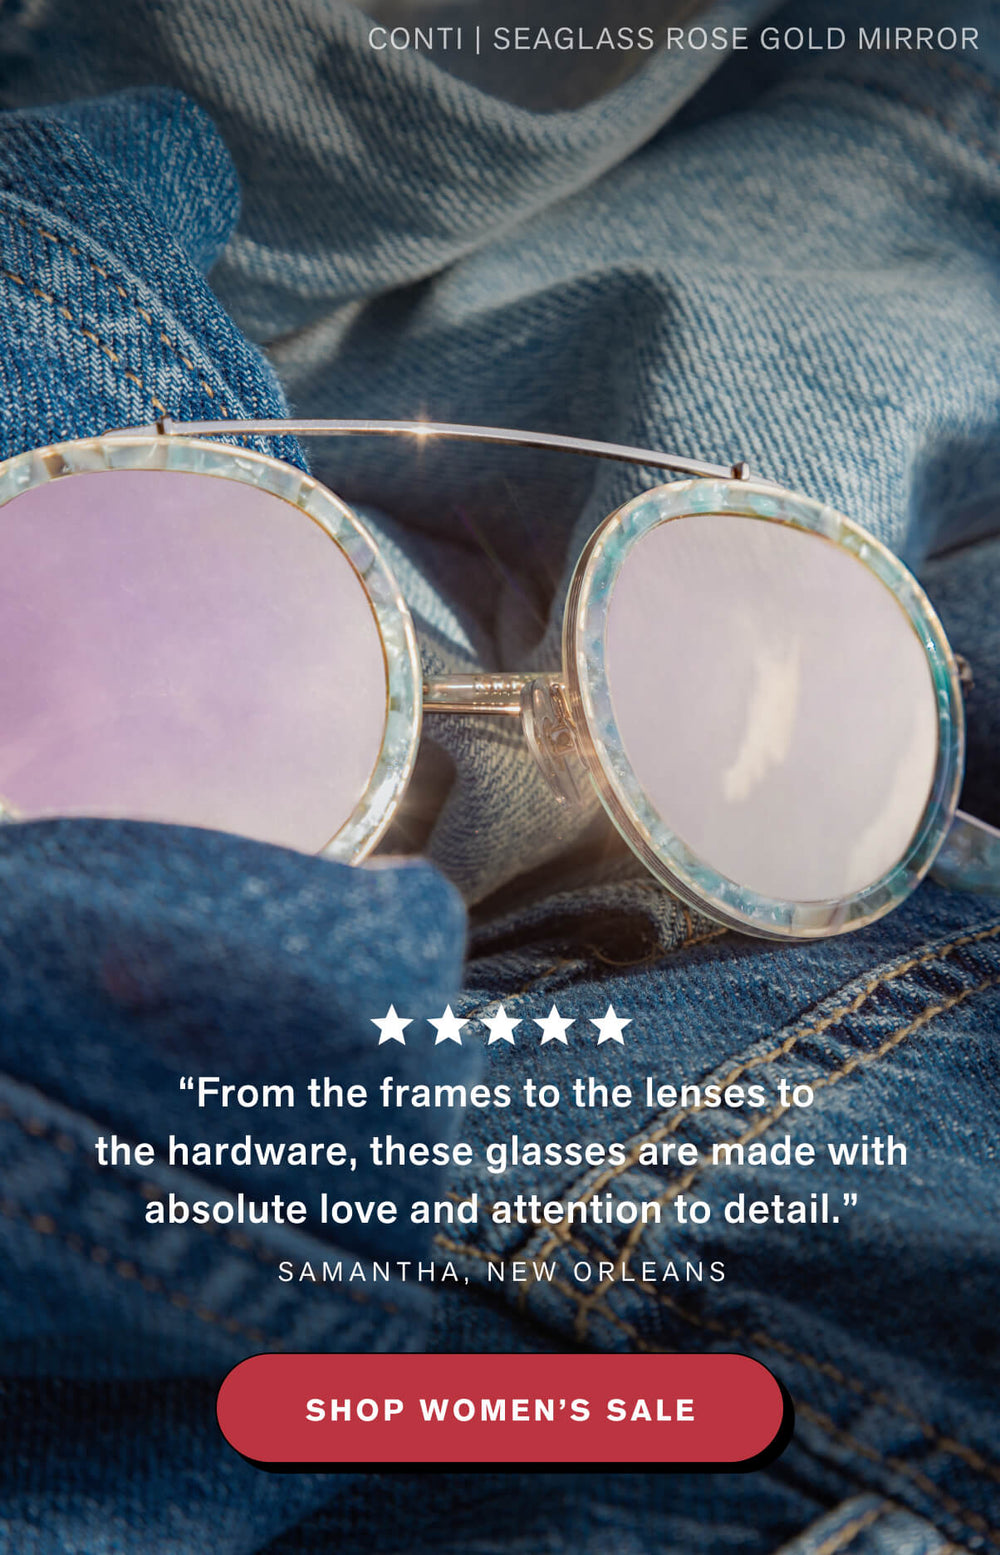 REVIEW: “From the frames to the lenses to the hardware, these glasses are made with absolute love and attention to detail.” Samantha, New Orleans  SHOP WOMEN'S SALE